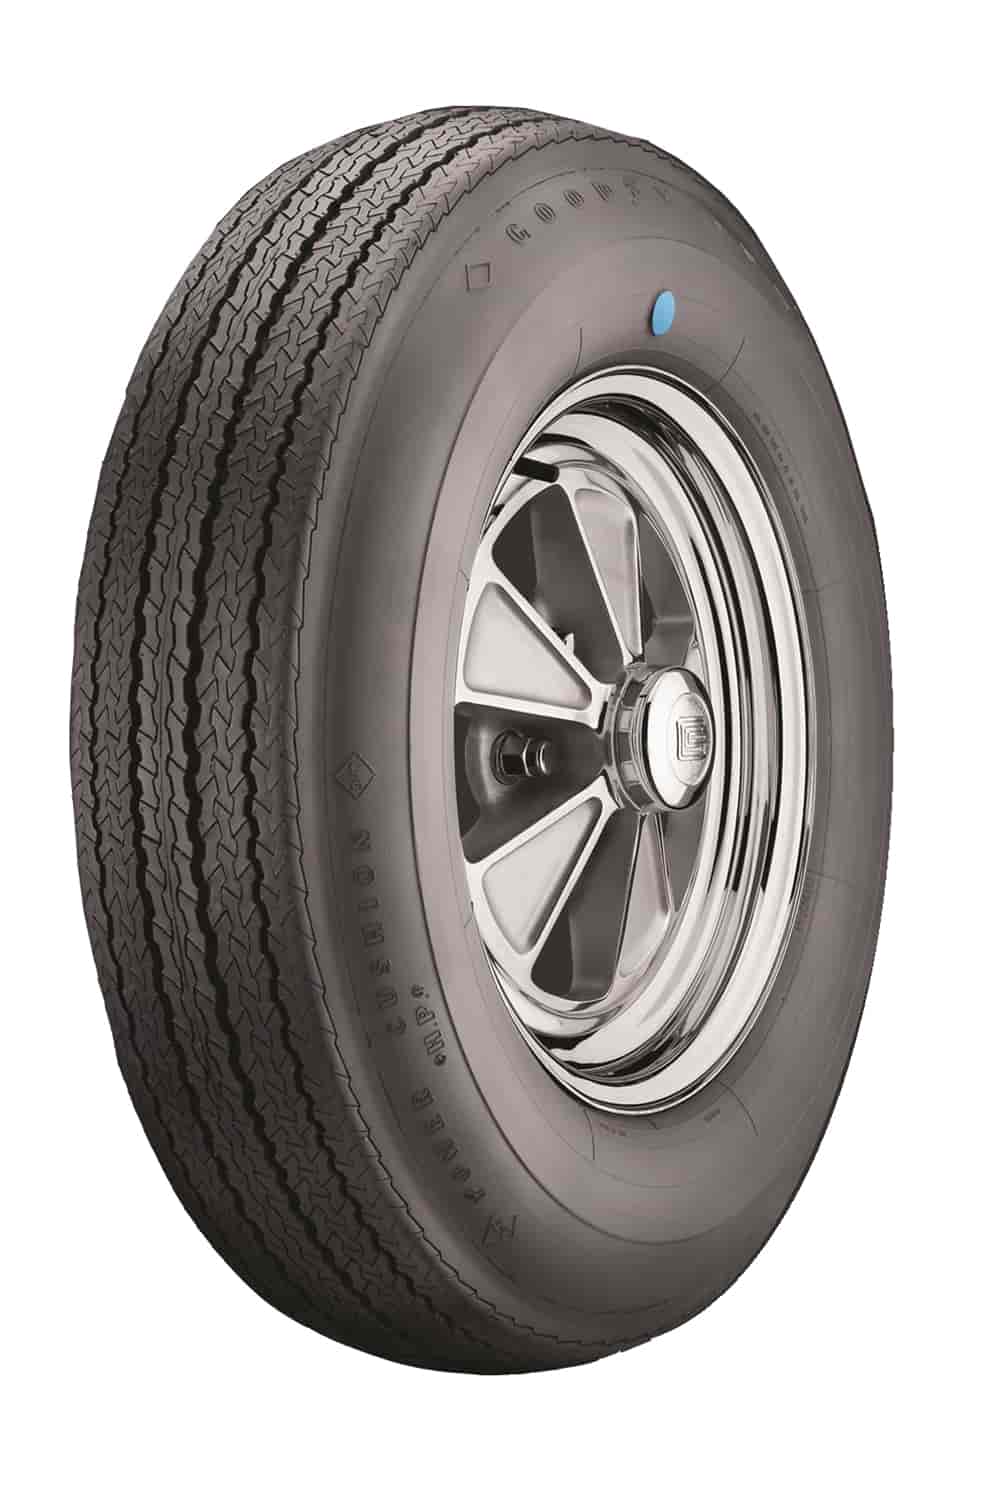 Goodyear Collector Series Speedway H.P. Power Cushion Tire